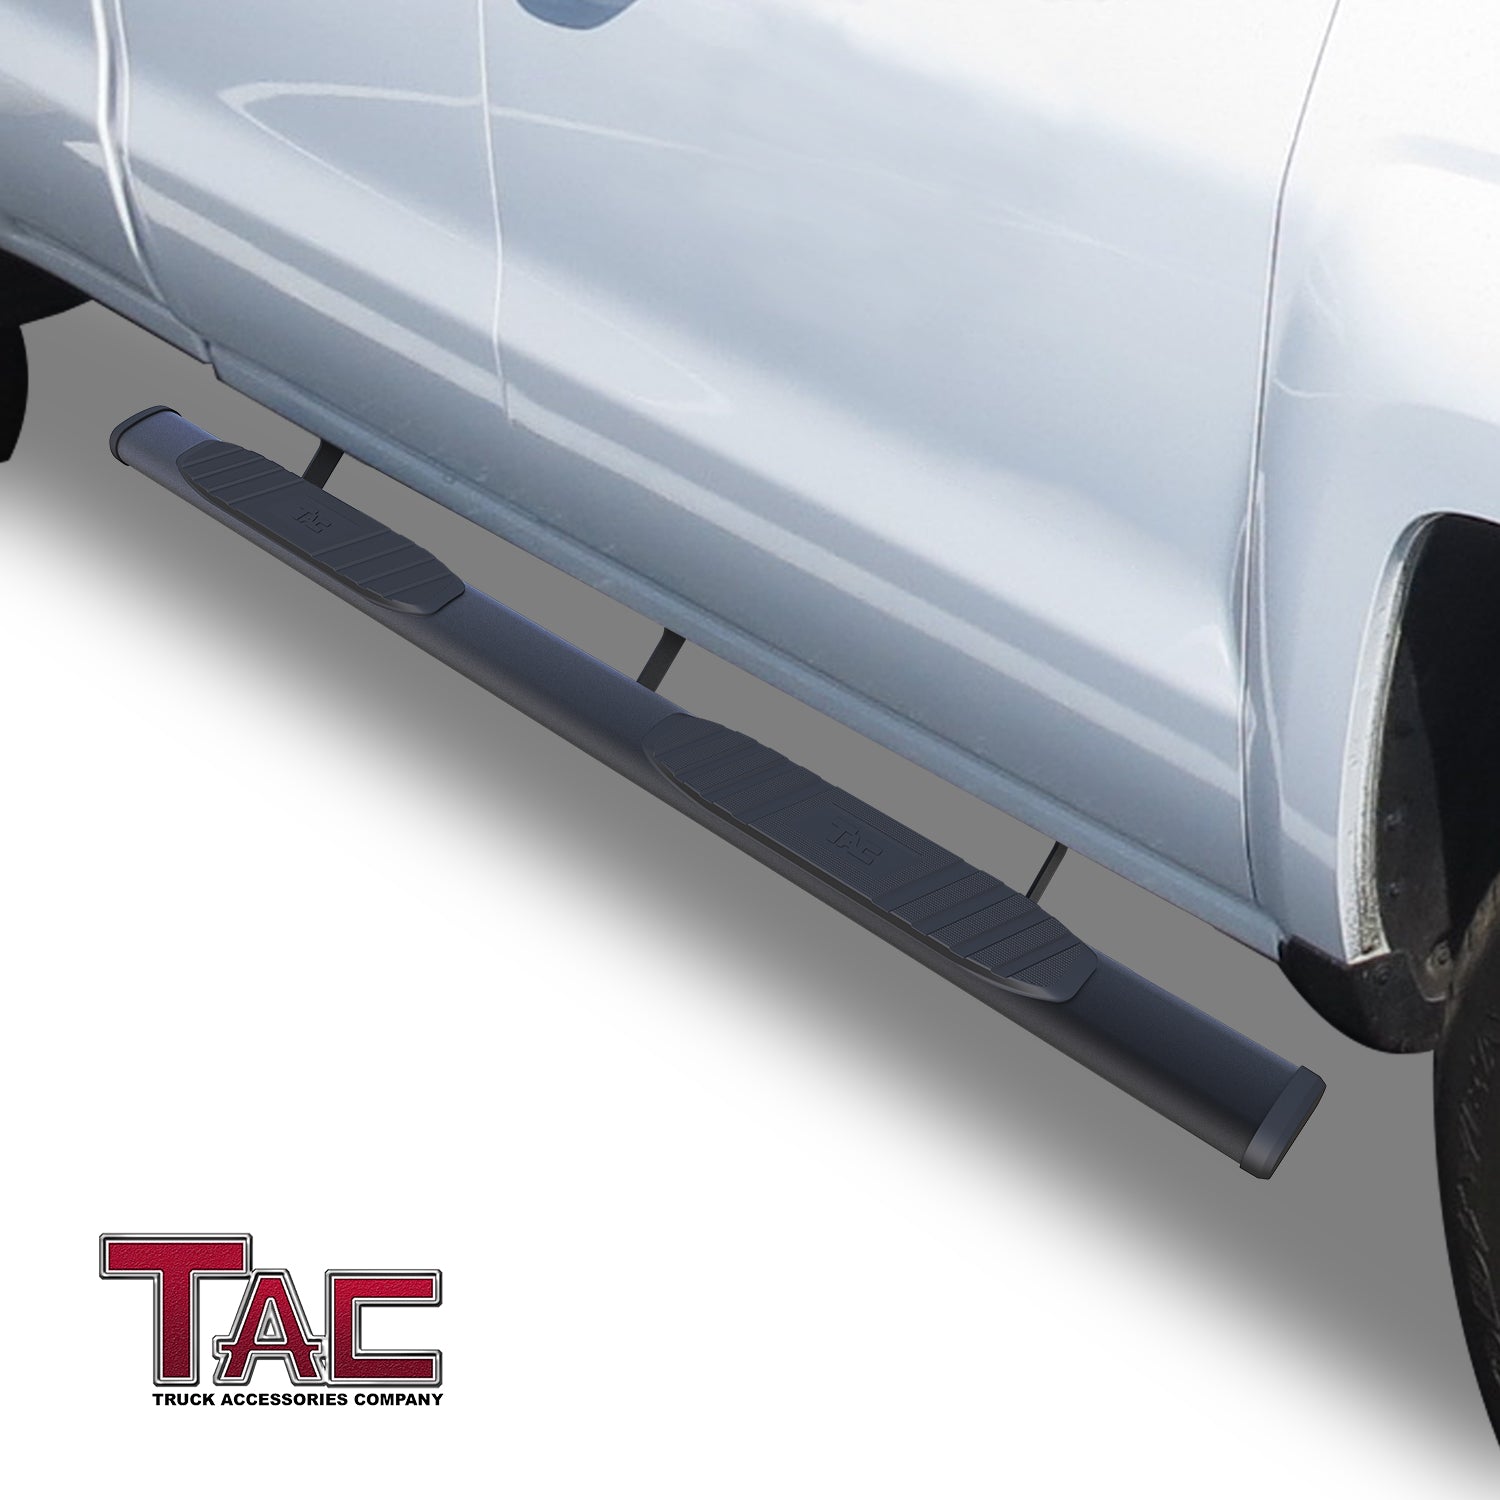 TAC Arrow Side Steps Running Boards Compatible with 2007-2018 Chevy Silverado/GMC Sierra 1500 | 2007-2019 2500/3500 Extended/Double Cab Truck Pickup 5” Aluminum Texture Black Step Rails Nerf Bars - 0